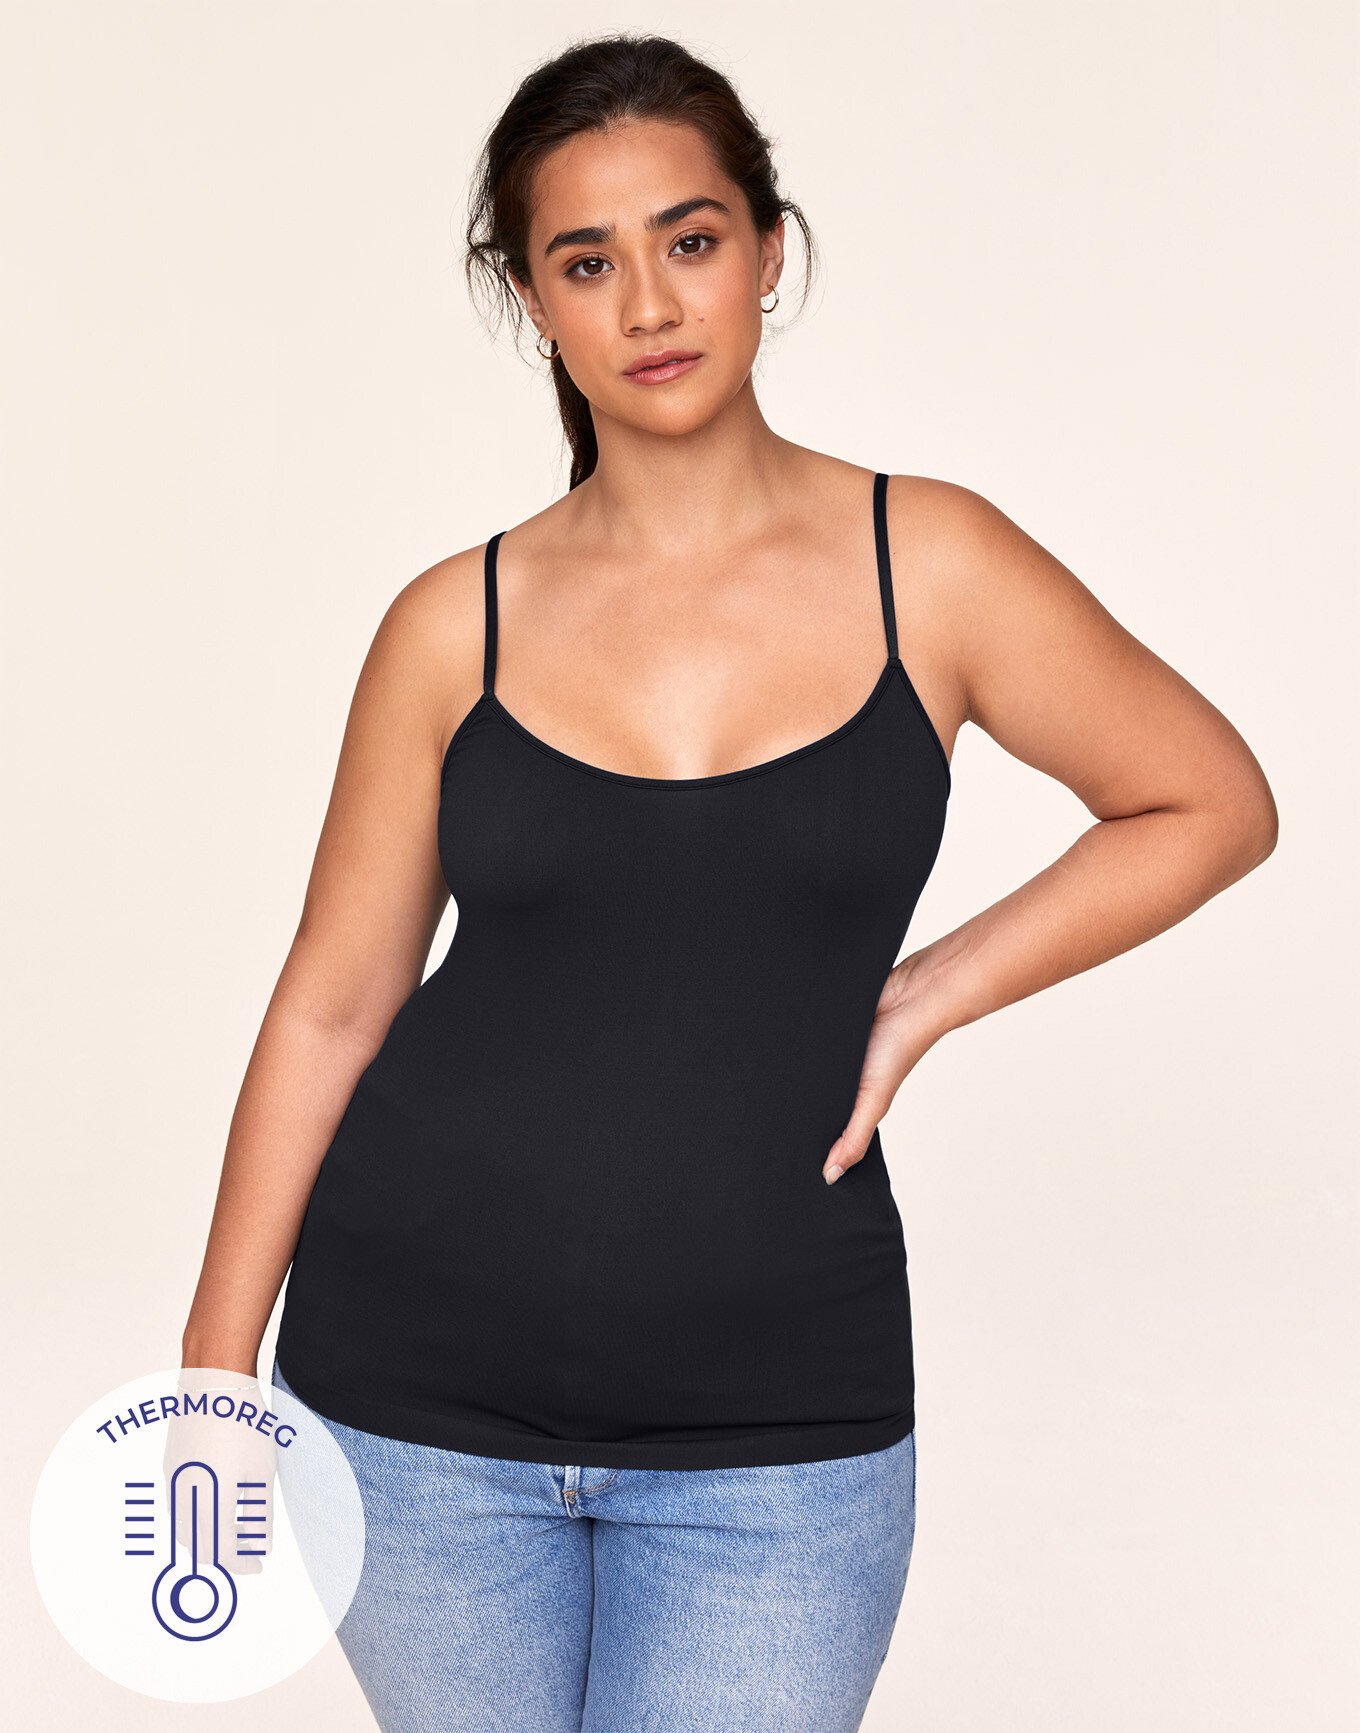 Plus Size Tops With Built In Bras